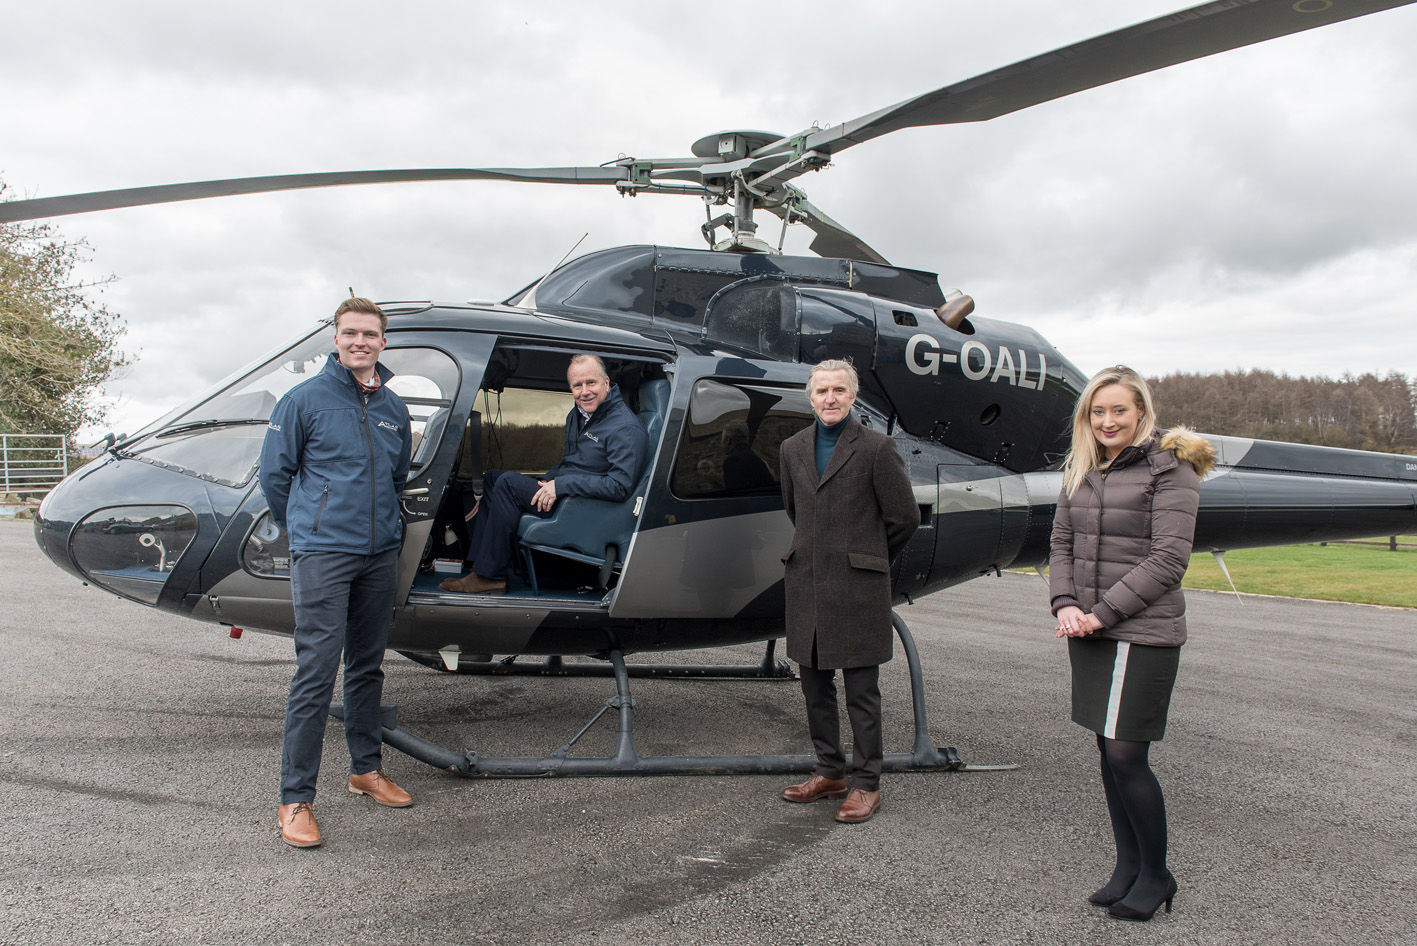 Celebrating the successful acquisition of Atlas Helicopters are, from left, Jack Schofield, Jason Schofield, James Towler and Emily Steed